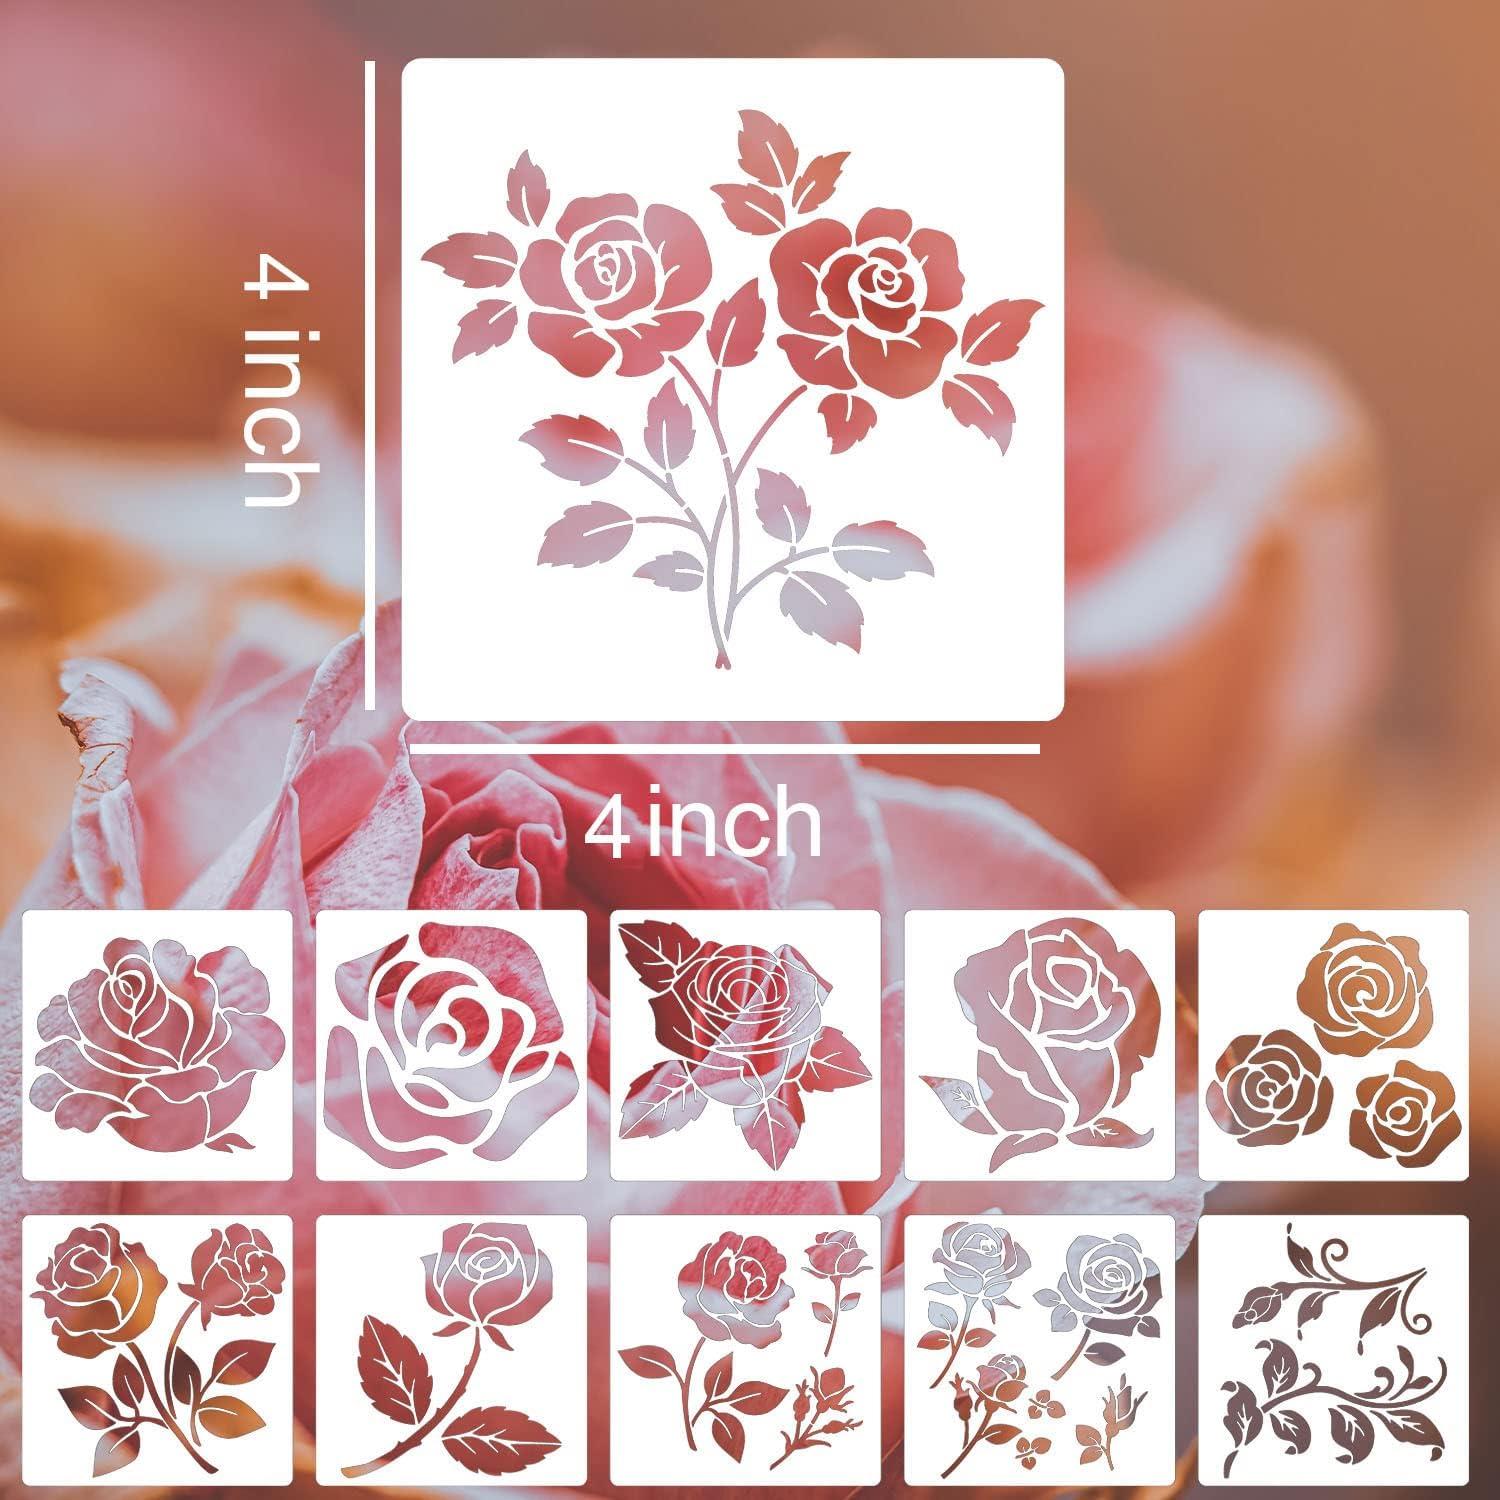 Simple floral stencils from The Stencil Library. Stencil catalogue